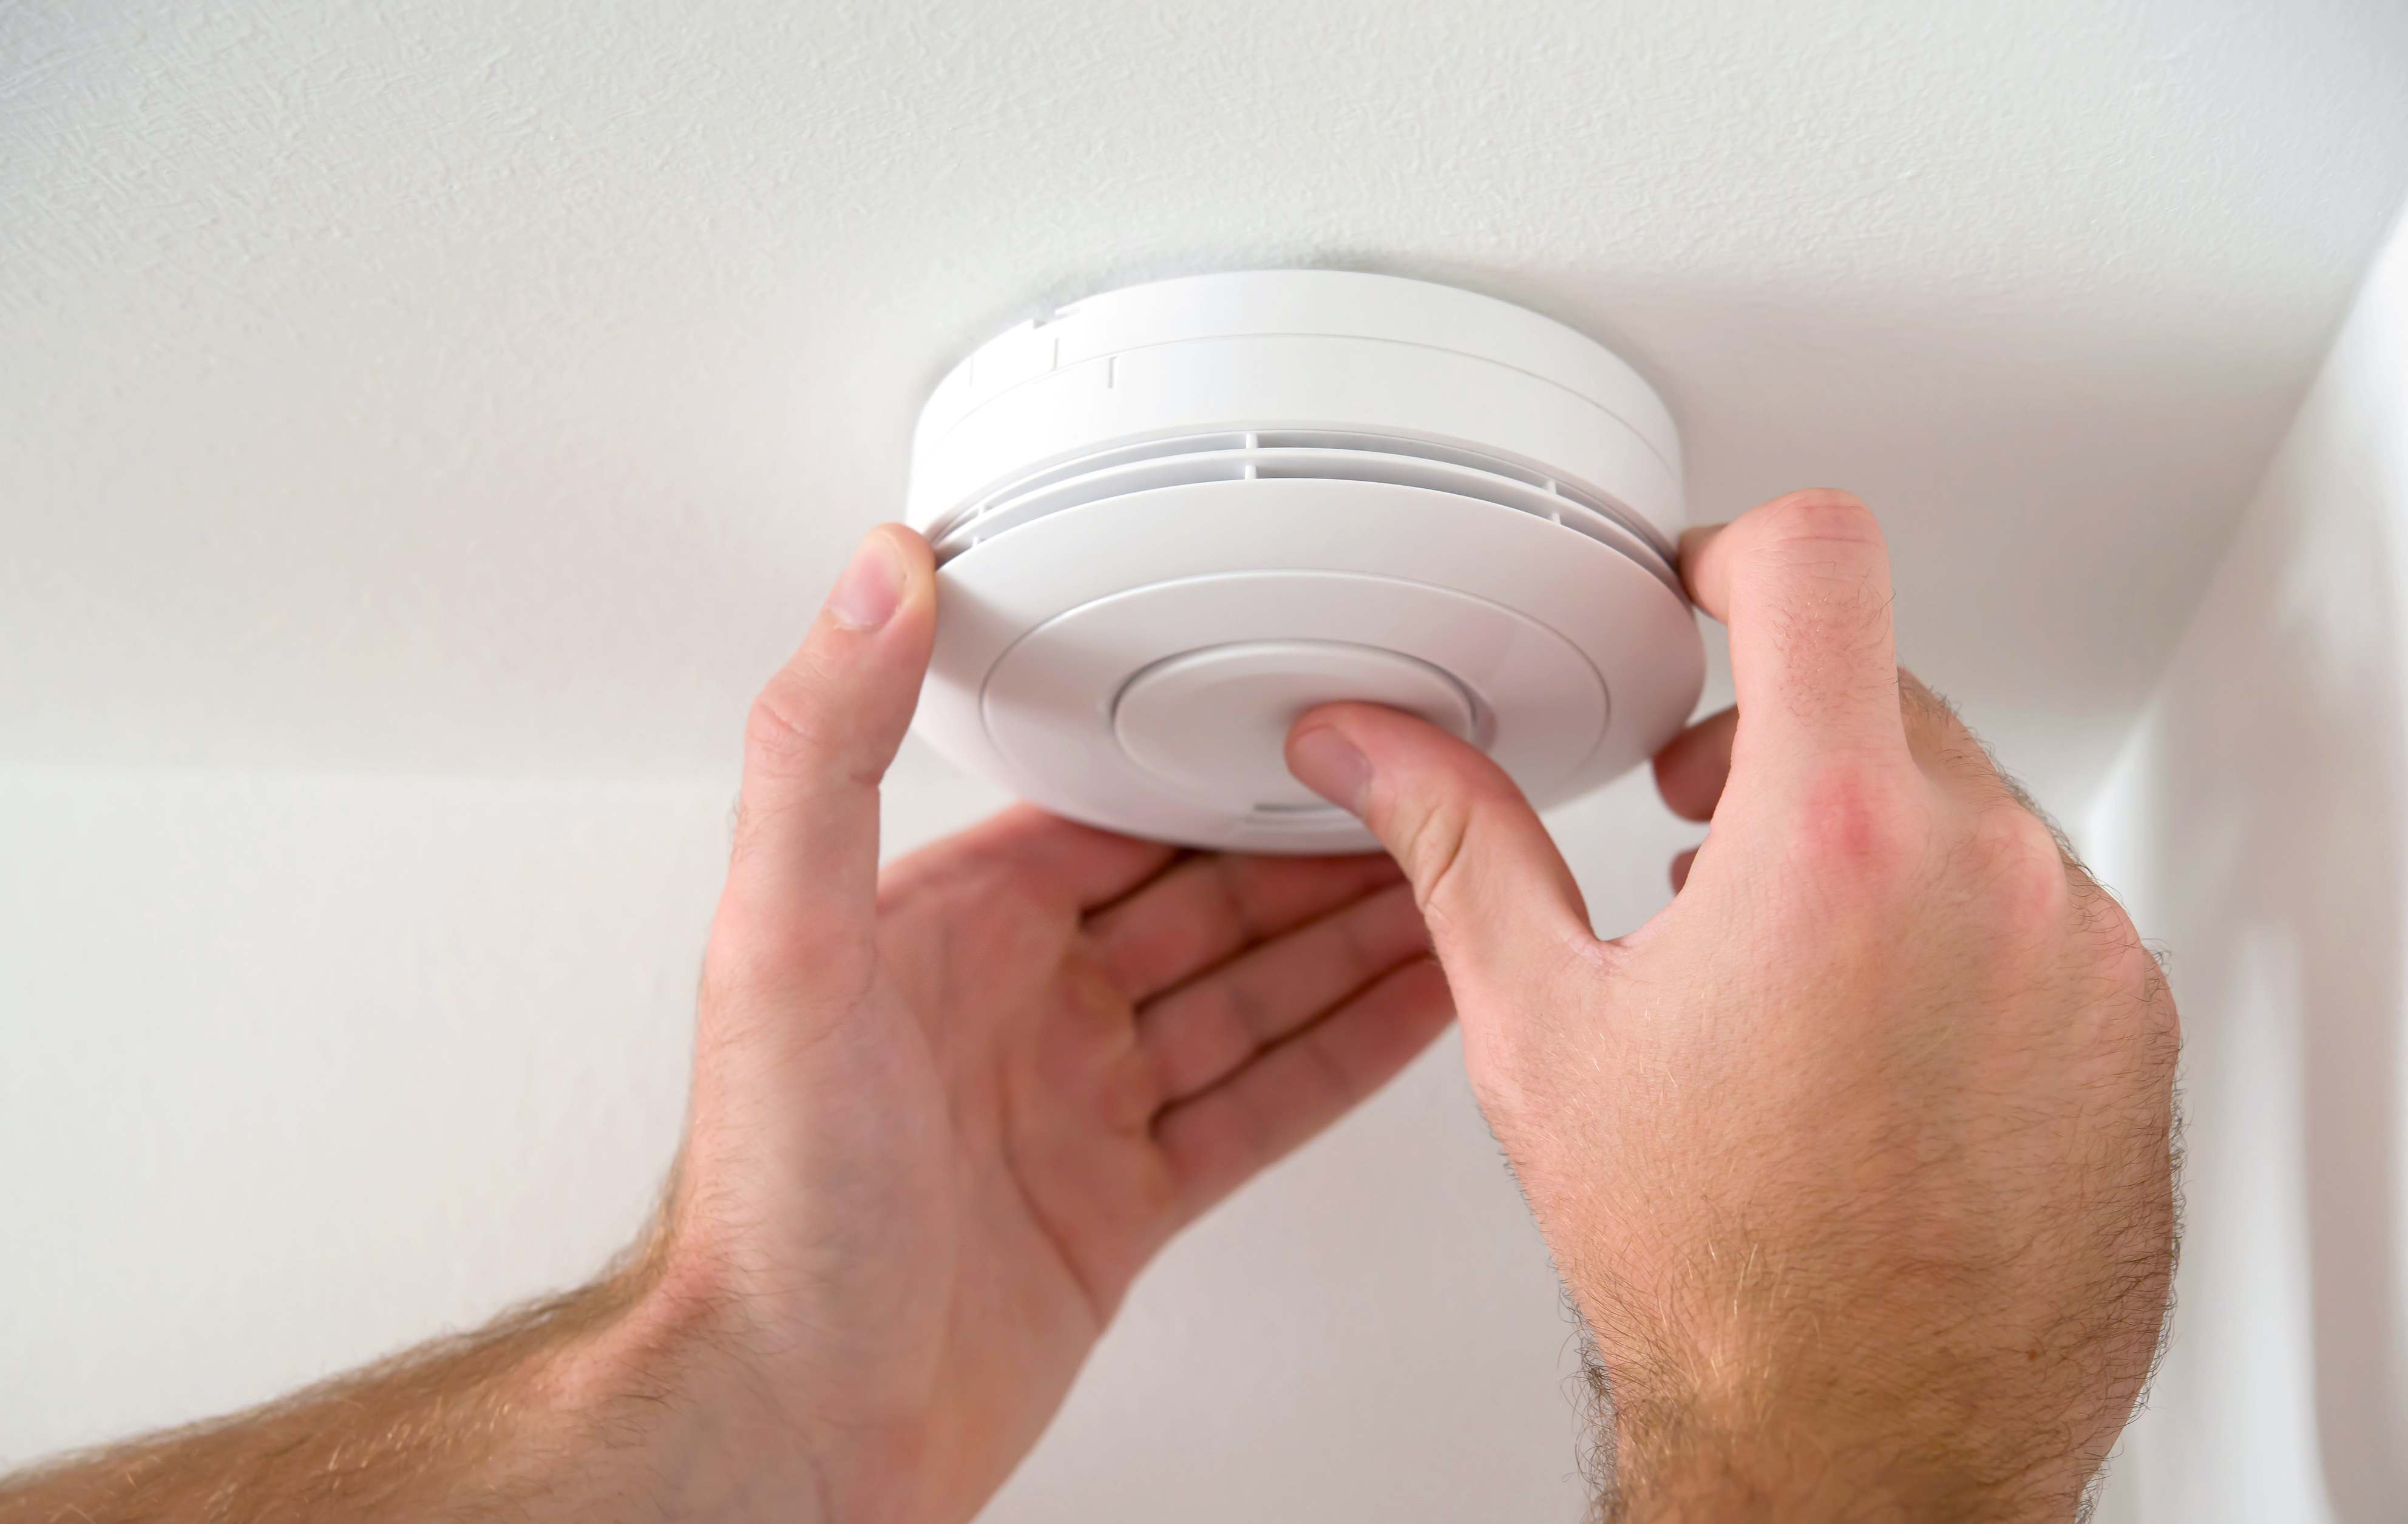 Close-up of male hands testing a white fire alarm on a white ceiling